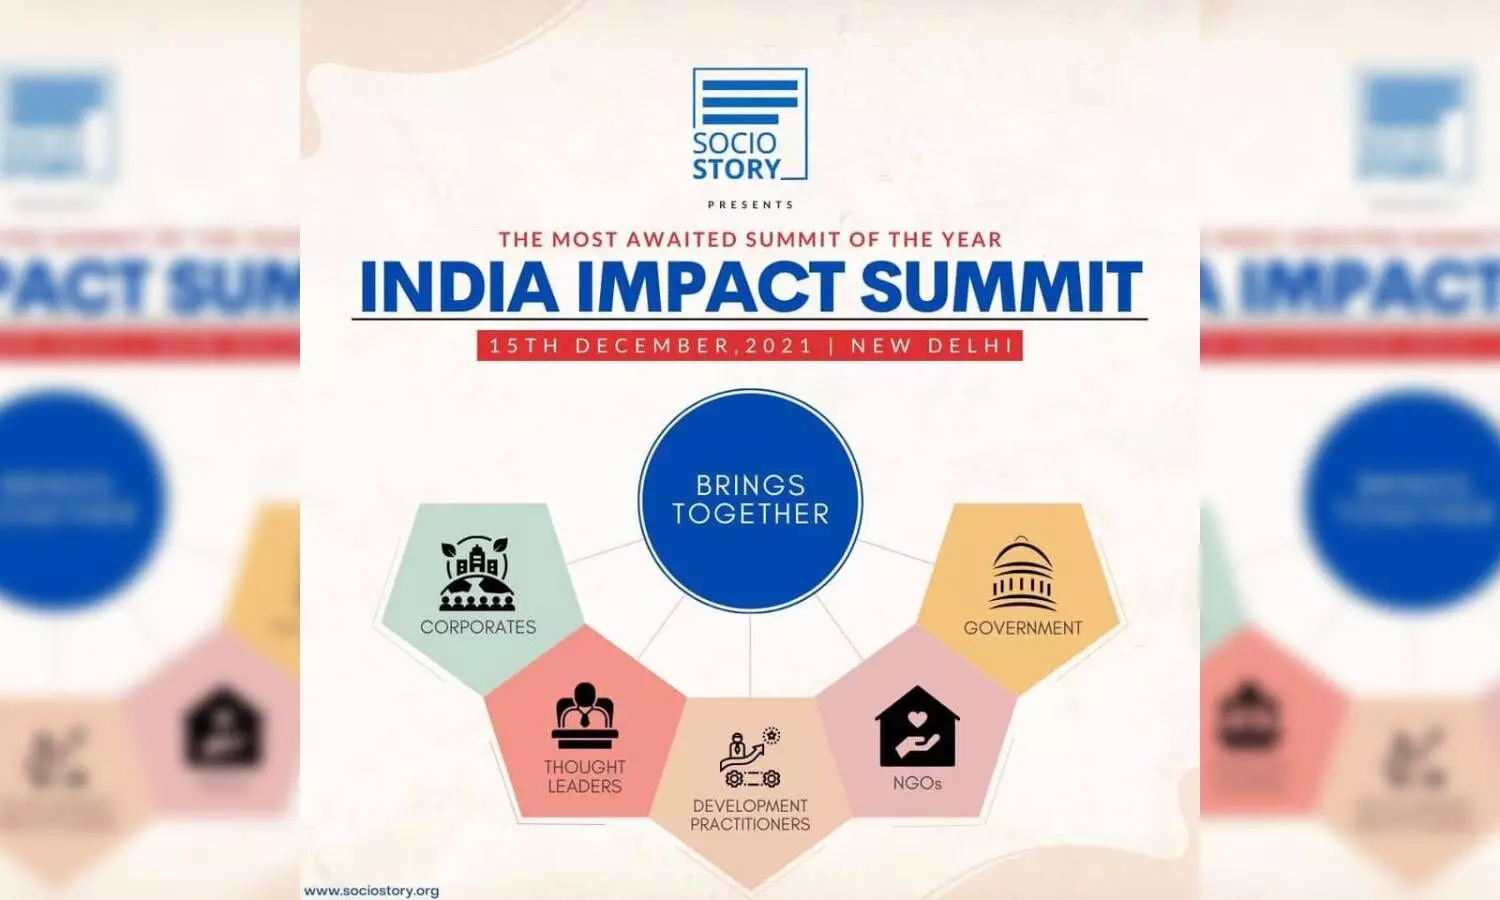 India Impact Summit: Socio Story to host discussion on digital divide, livelihood on 15 Dec in Delhi